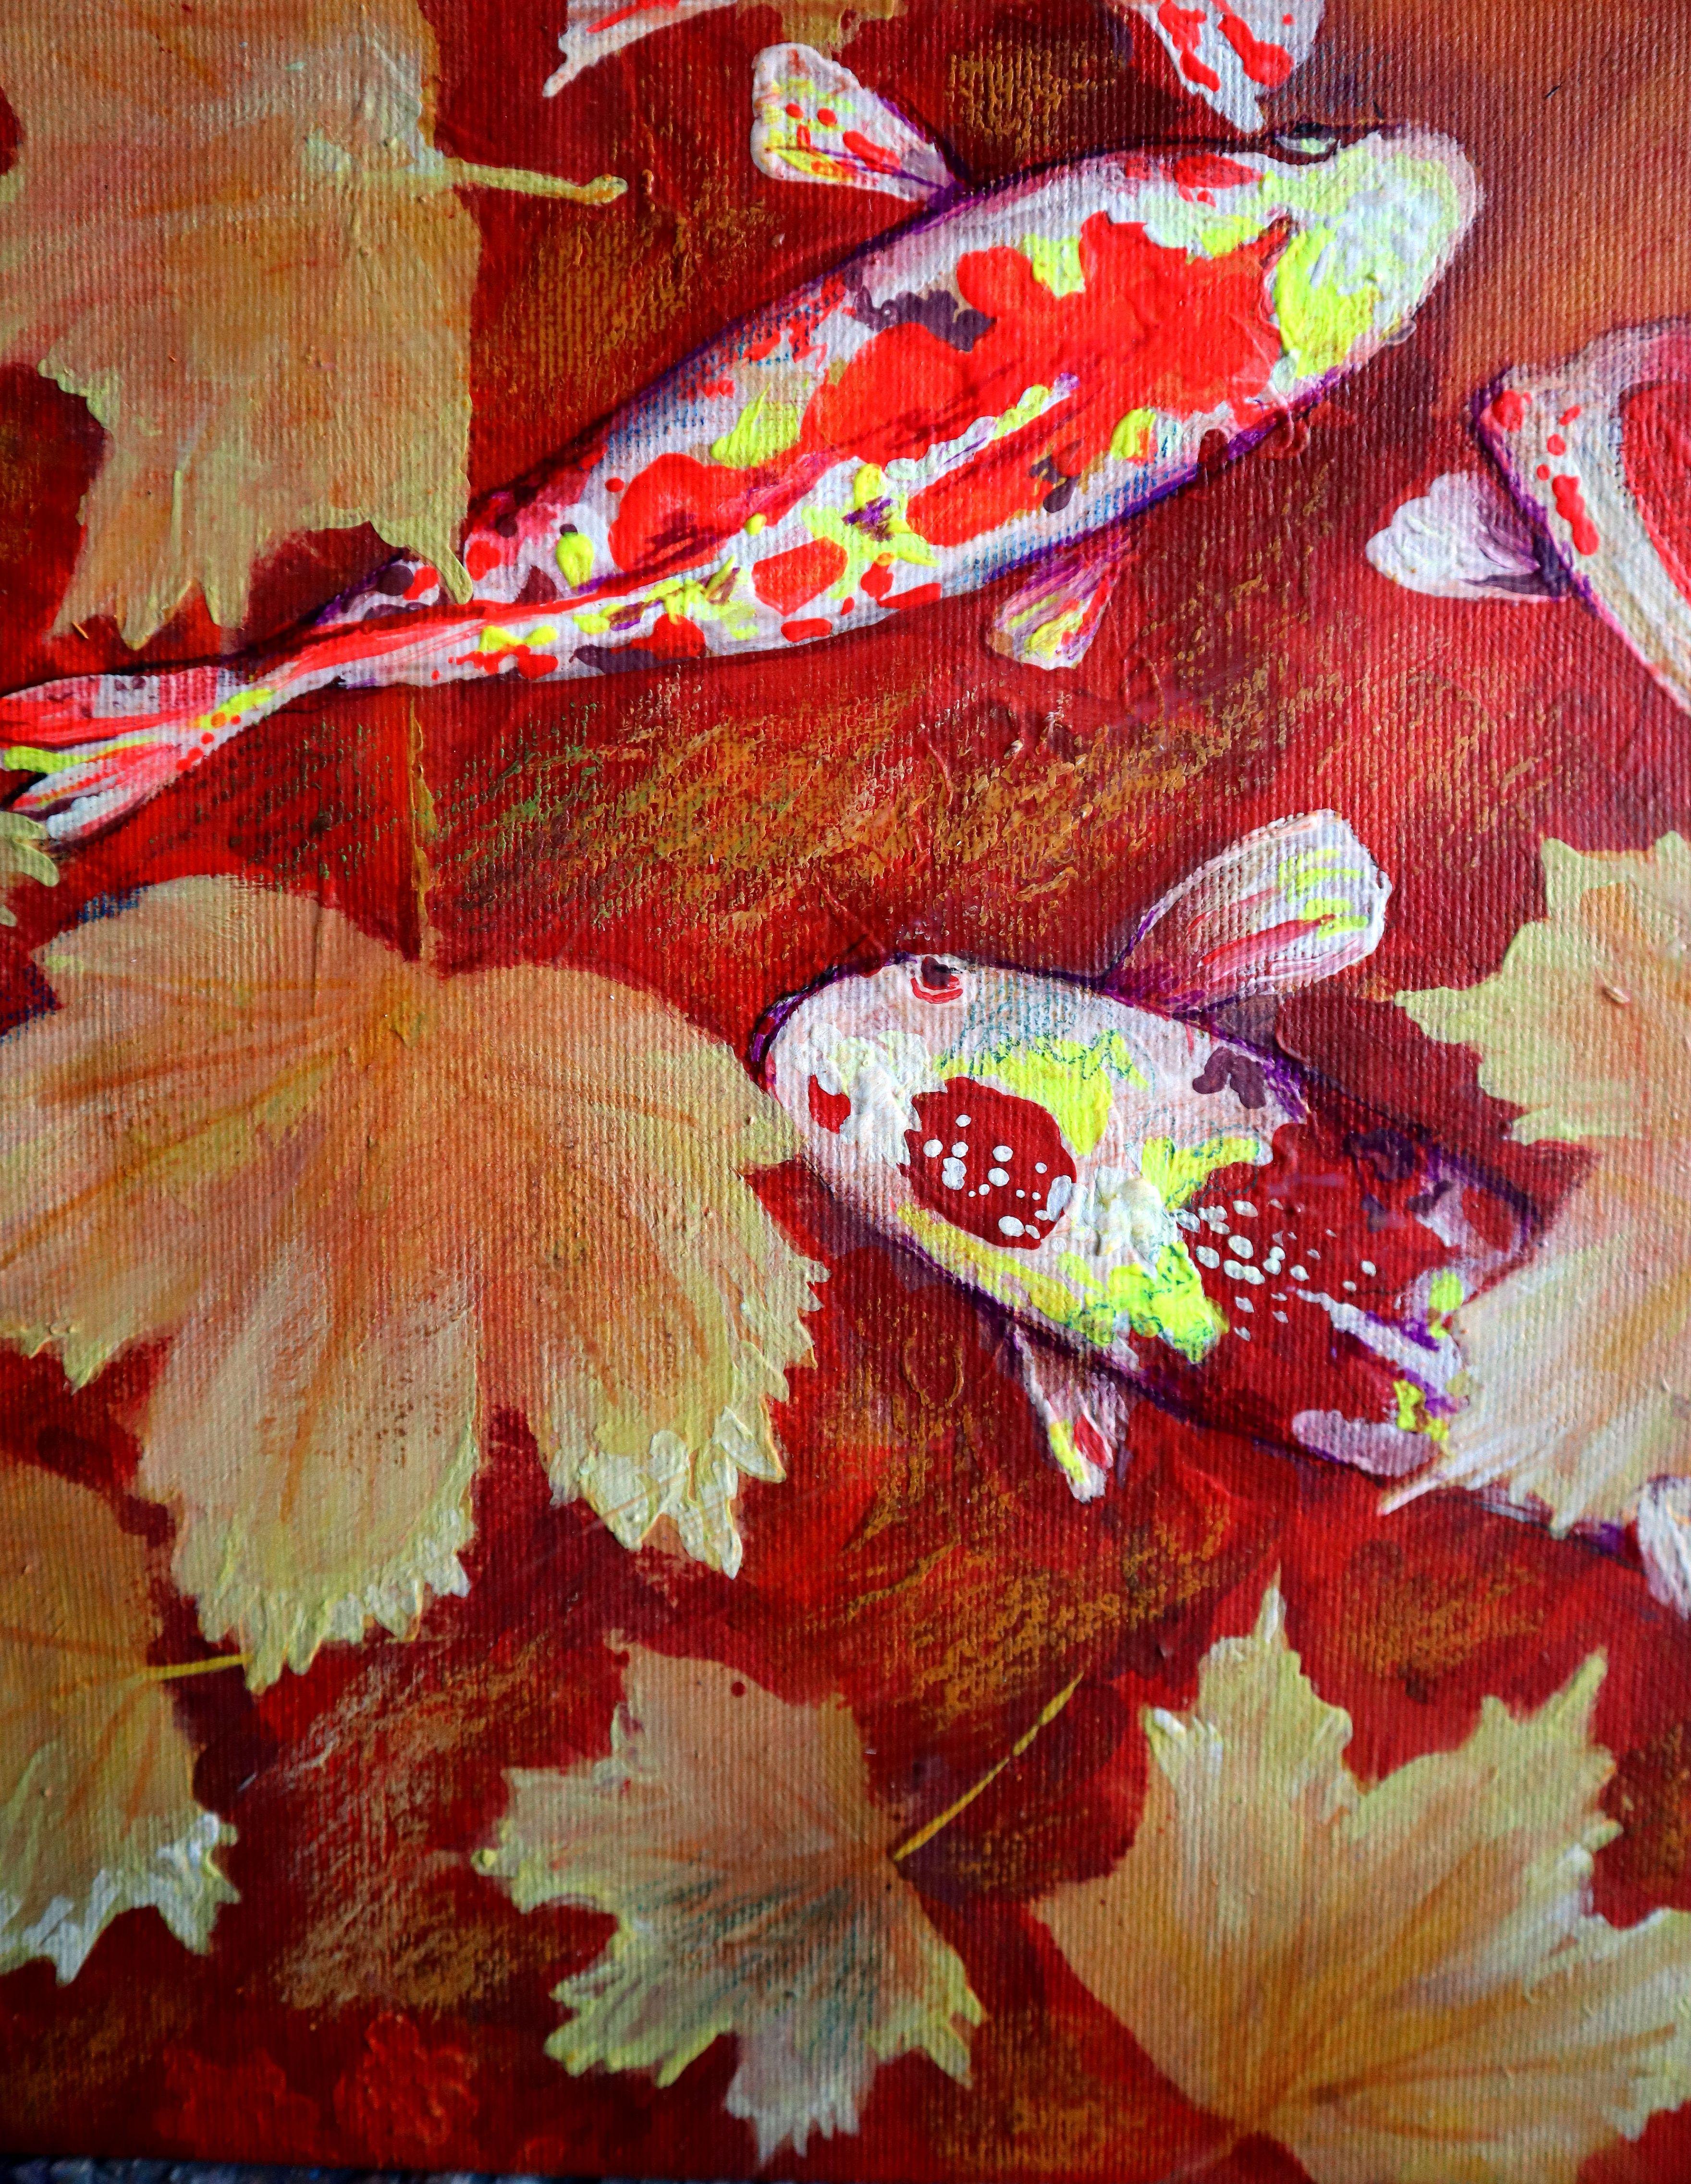 Yellow Leaves and Colored Koi Fish in Red Bottom Pool - Impressionist Painting by RAKHMET REDZHEPOV (RAMZI)